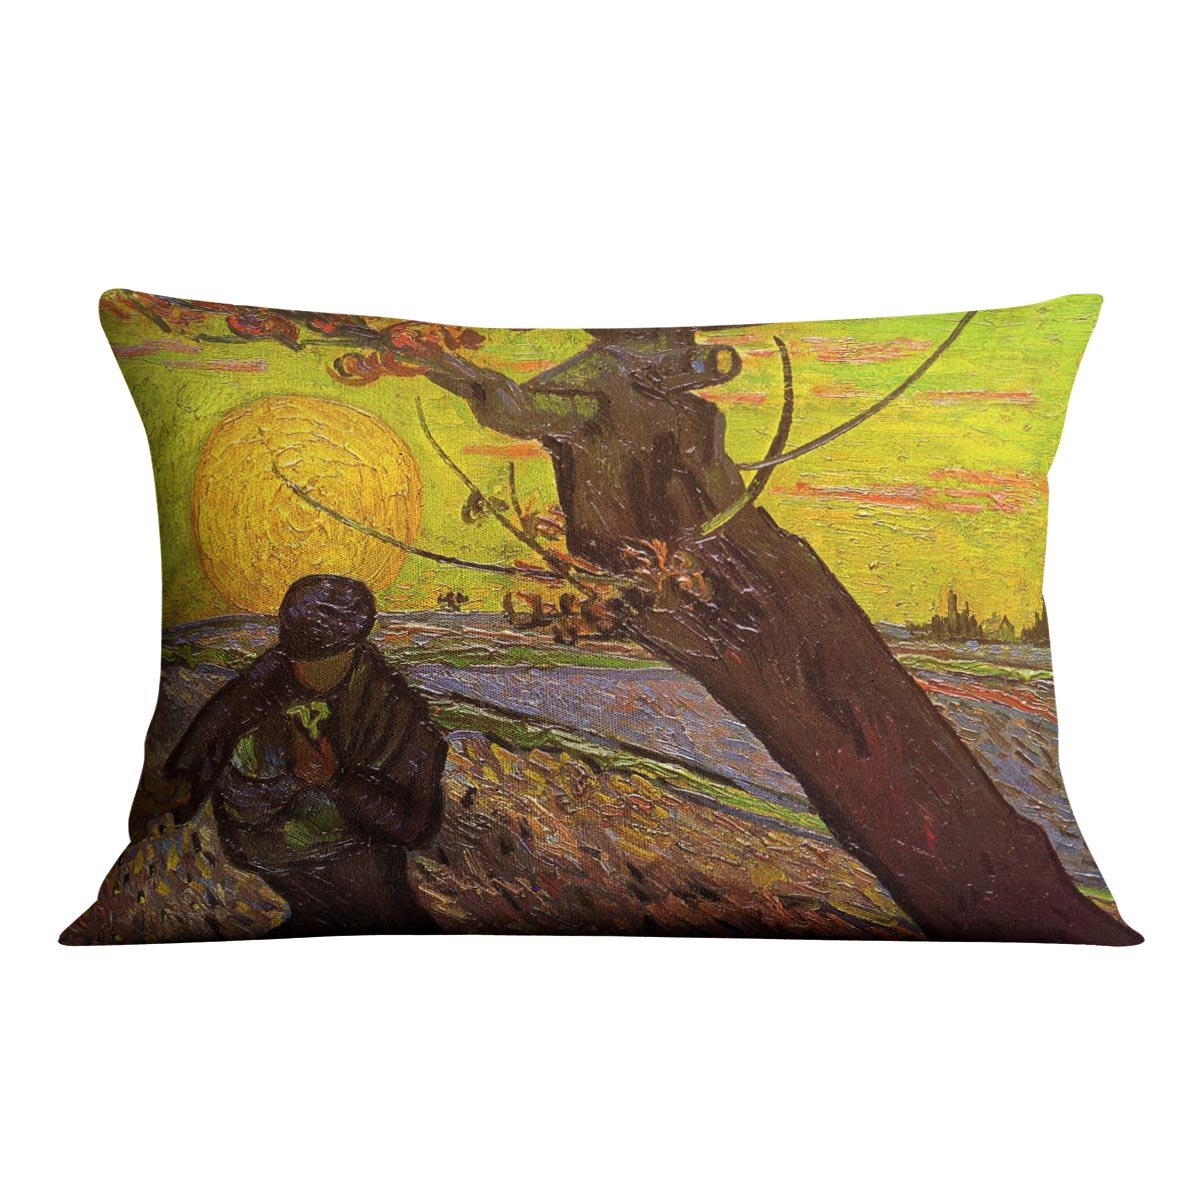 The Sower by Van Gogh Throw Pillow